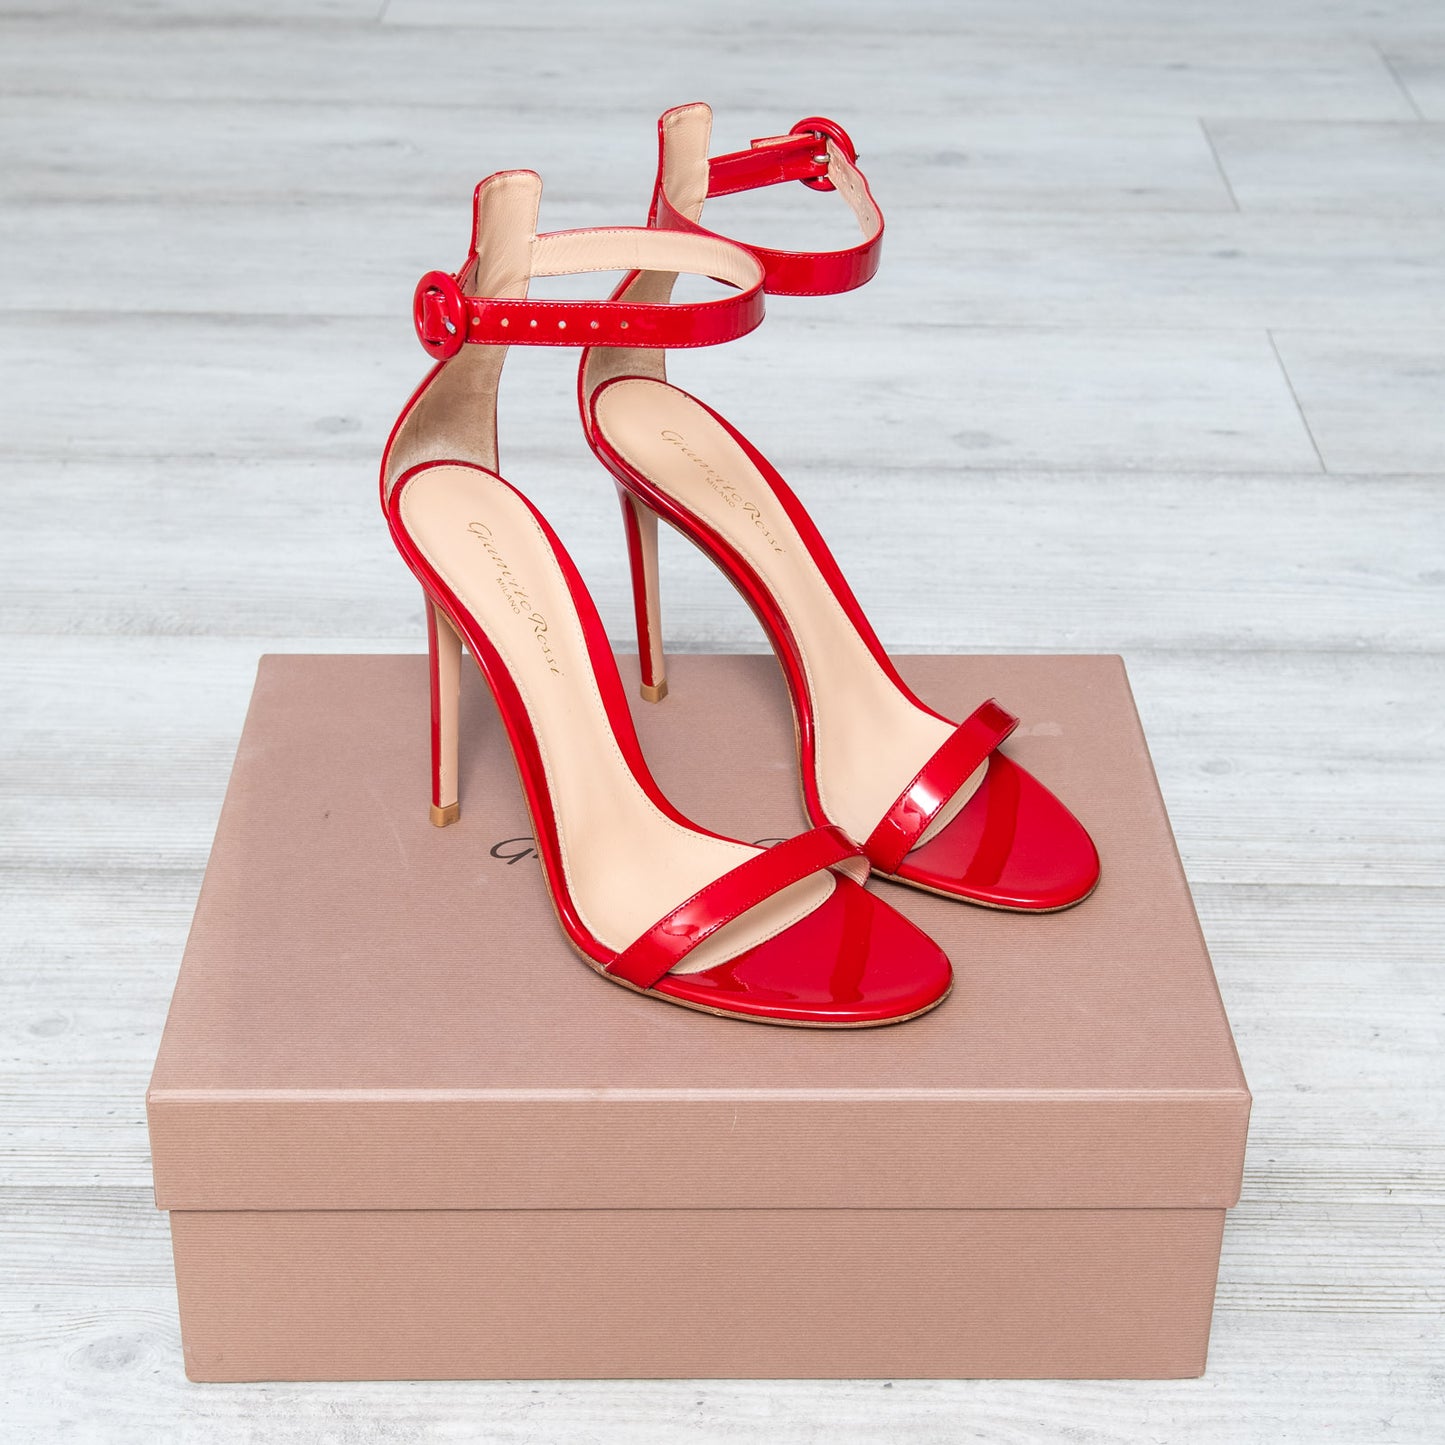 Gianvito Rossi Red Patent Heeled Sandals Size 39.5 - EVEYSPRELOVED